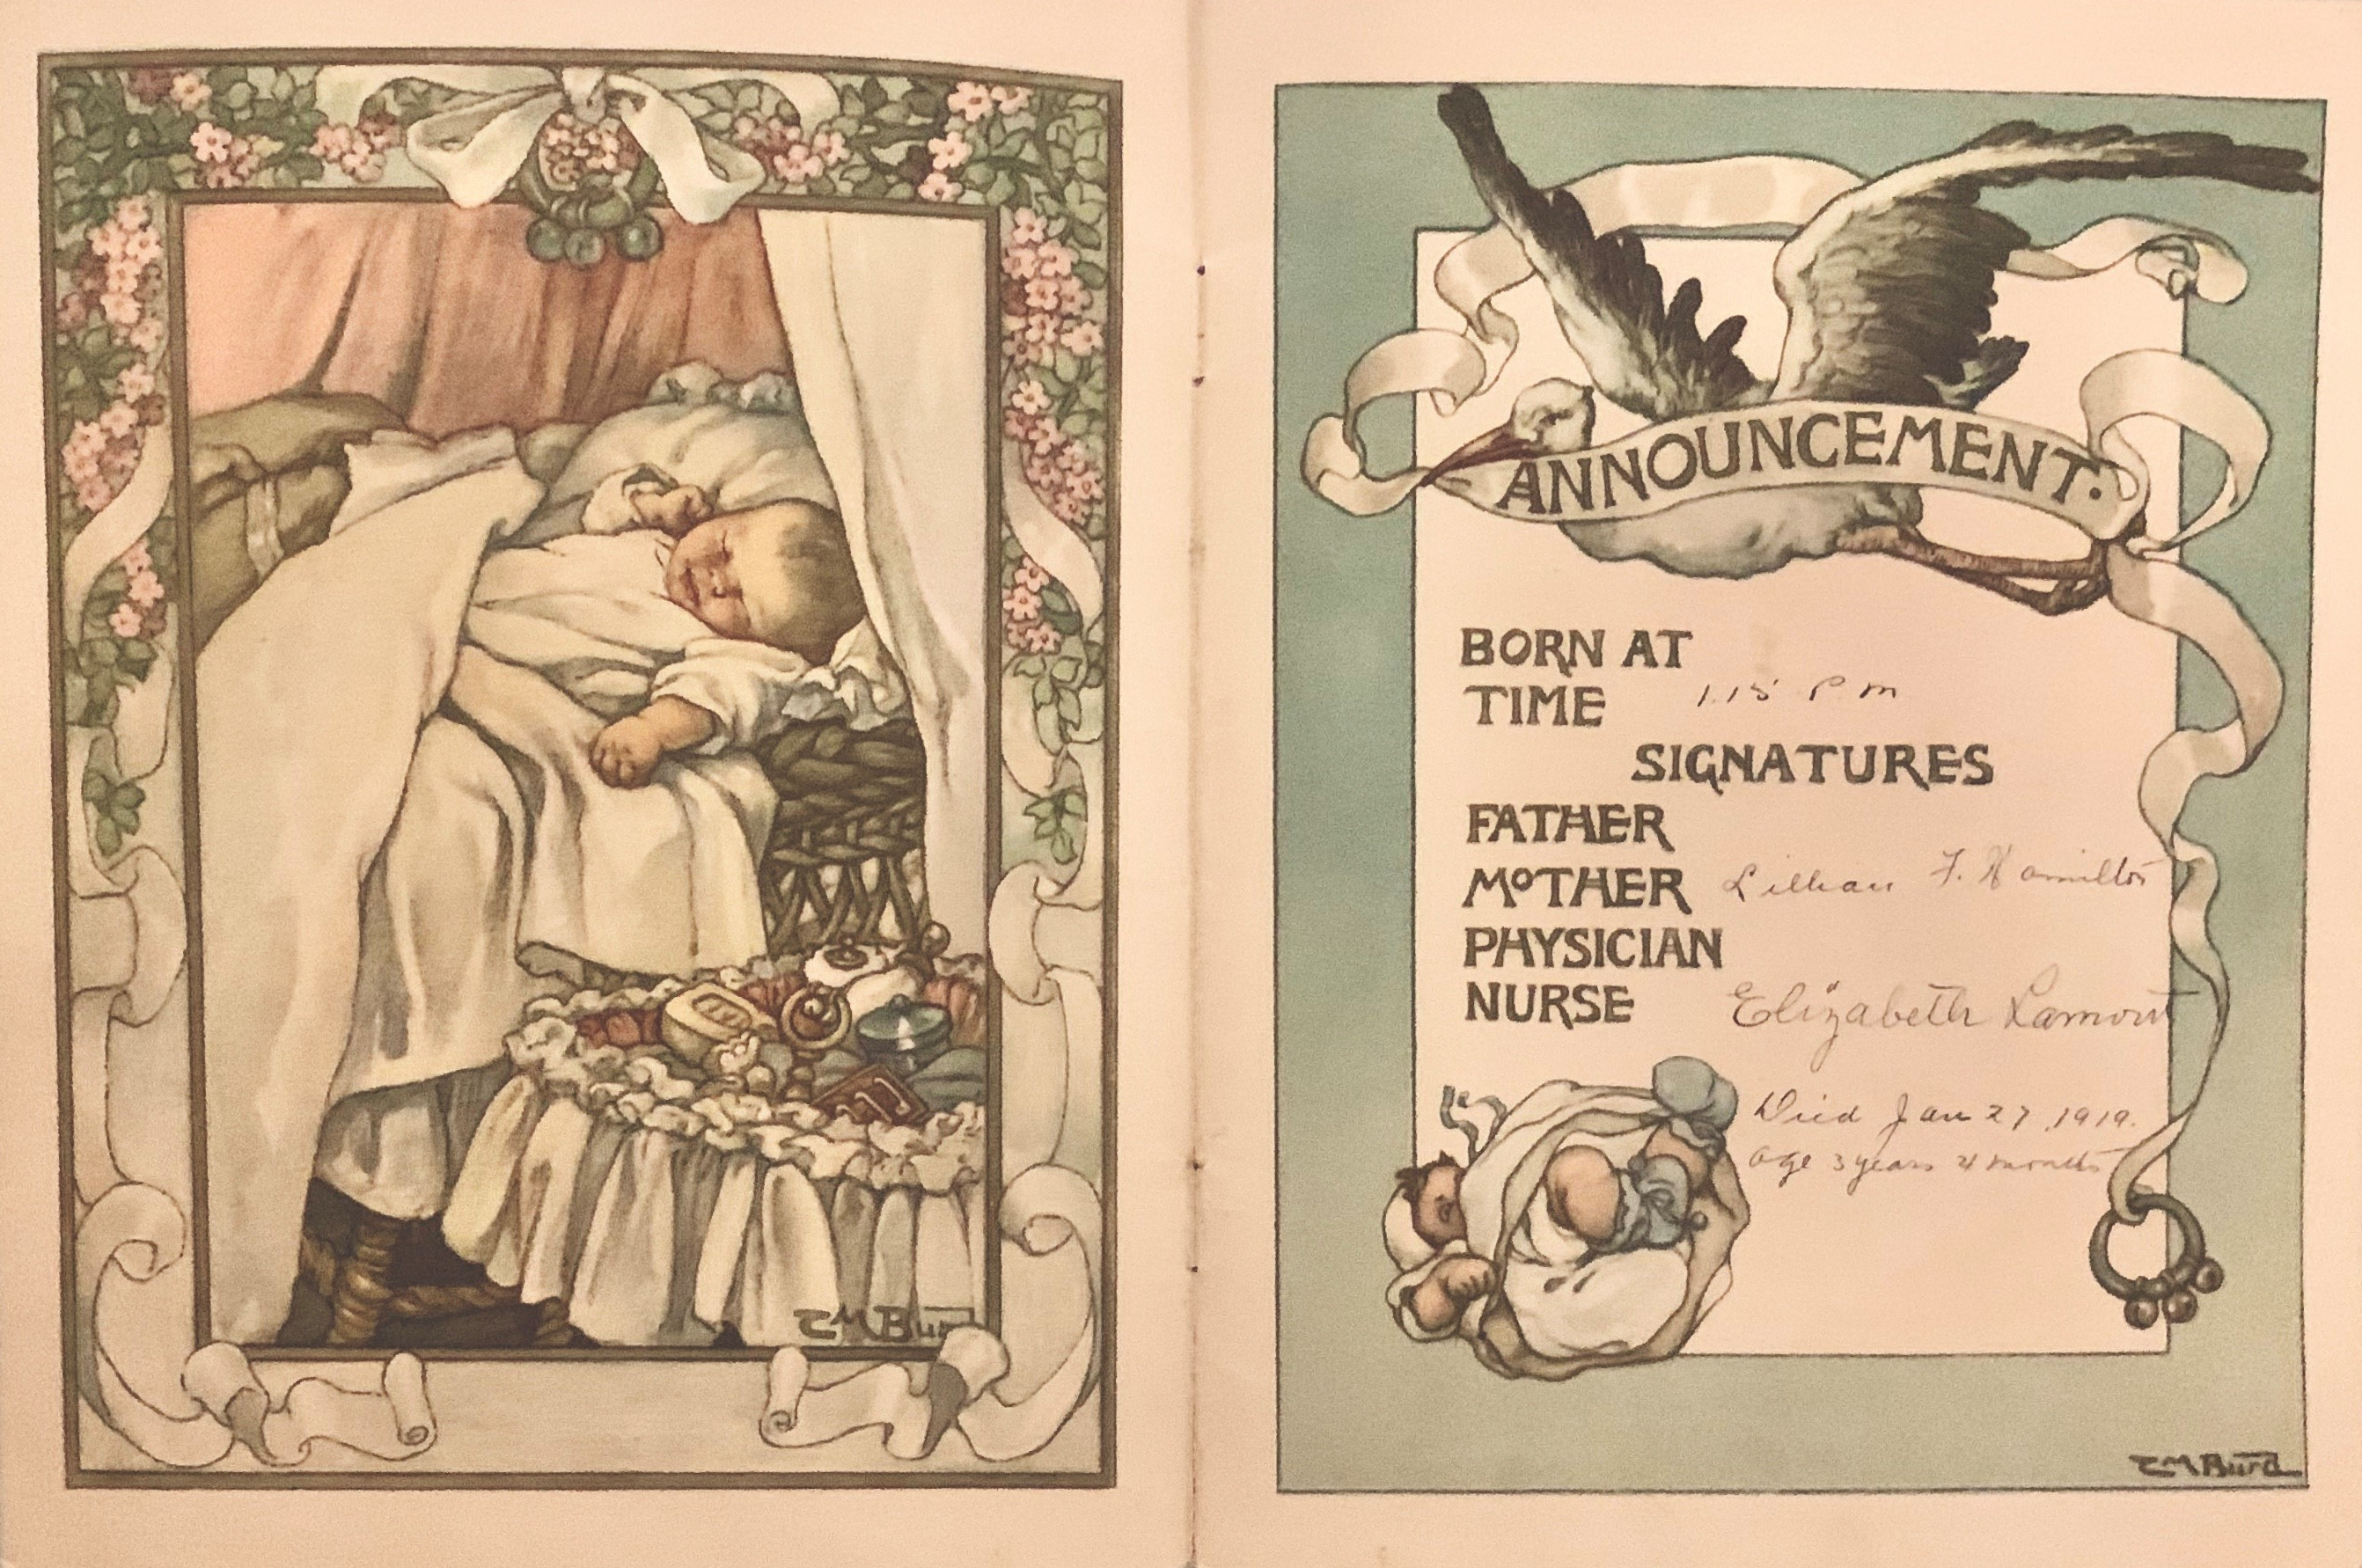 Colourful pages of Arthur Hamilton's baby book with details of his birth and death as filled in by his mother, Lillian Hamilton.